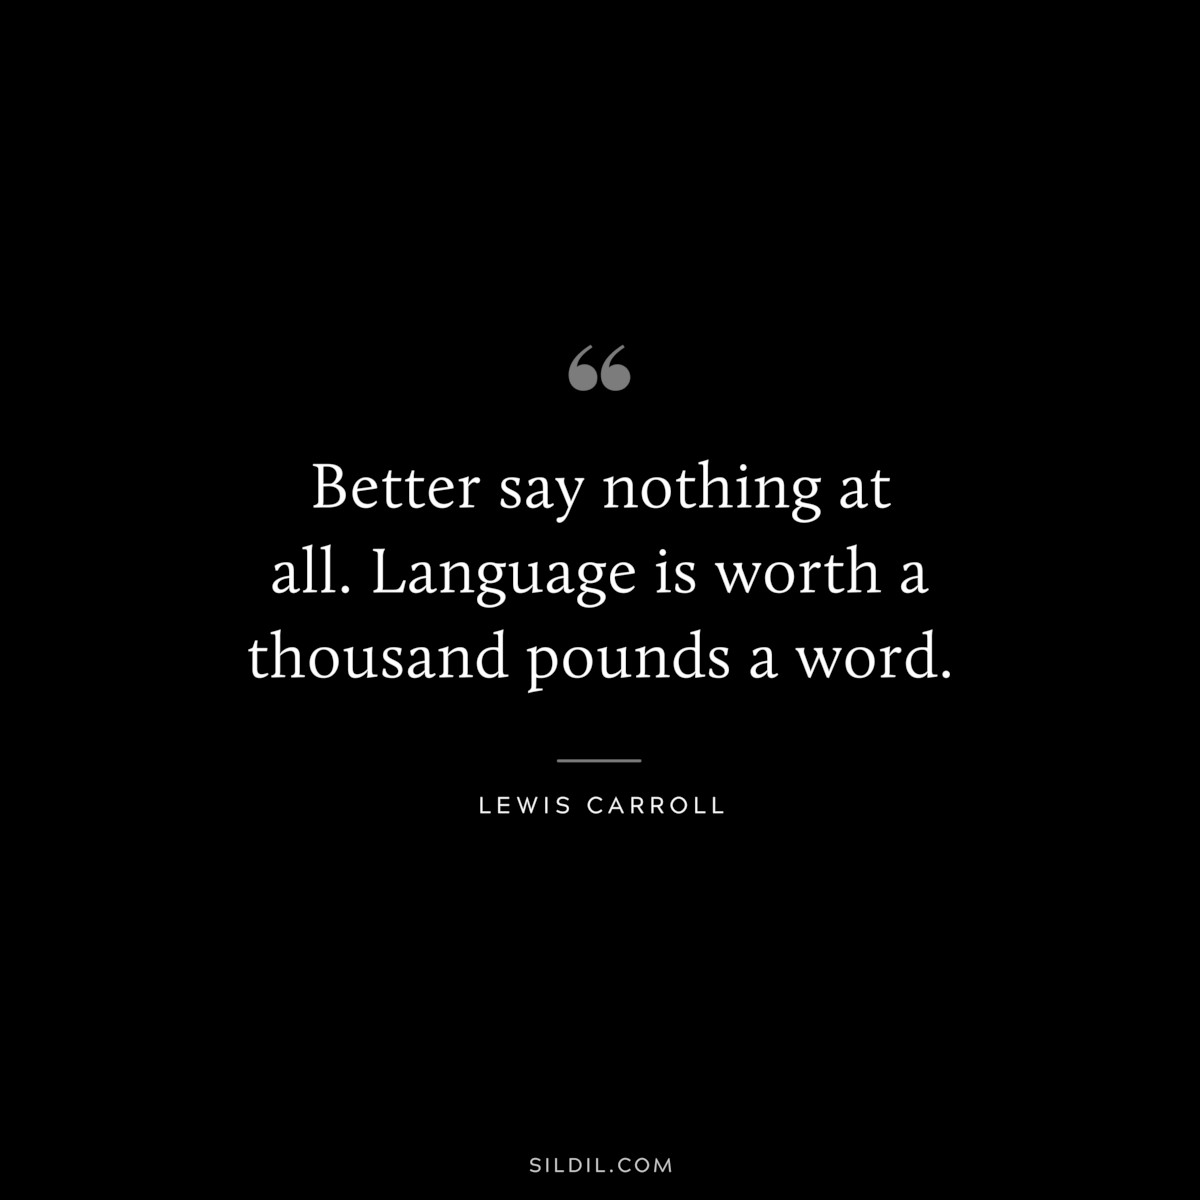 Better say nothing at all. Language is worth a thousand pounds a word.